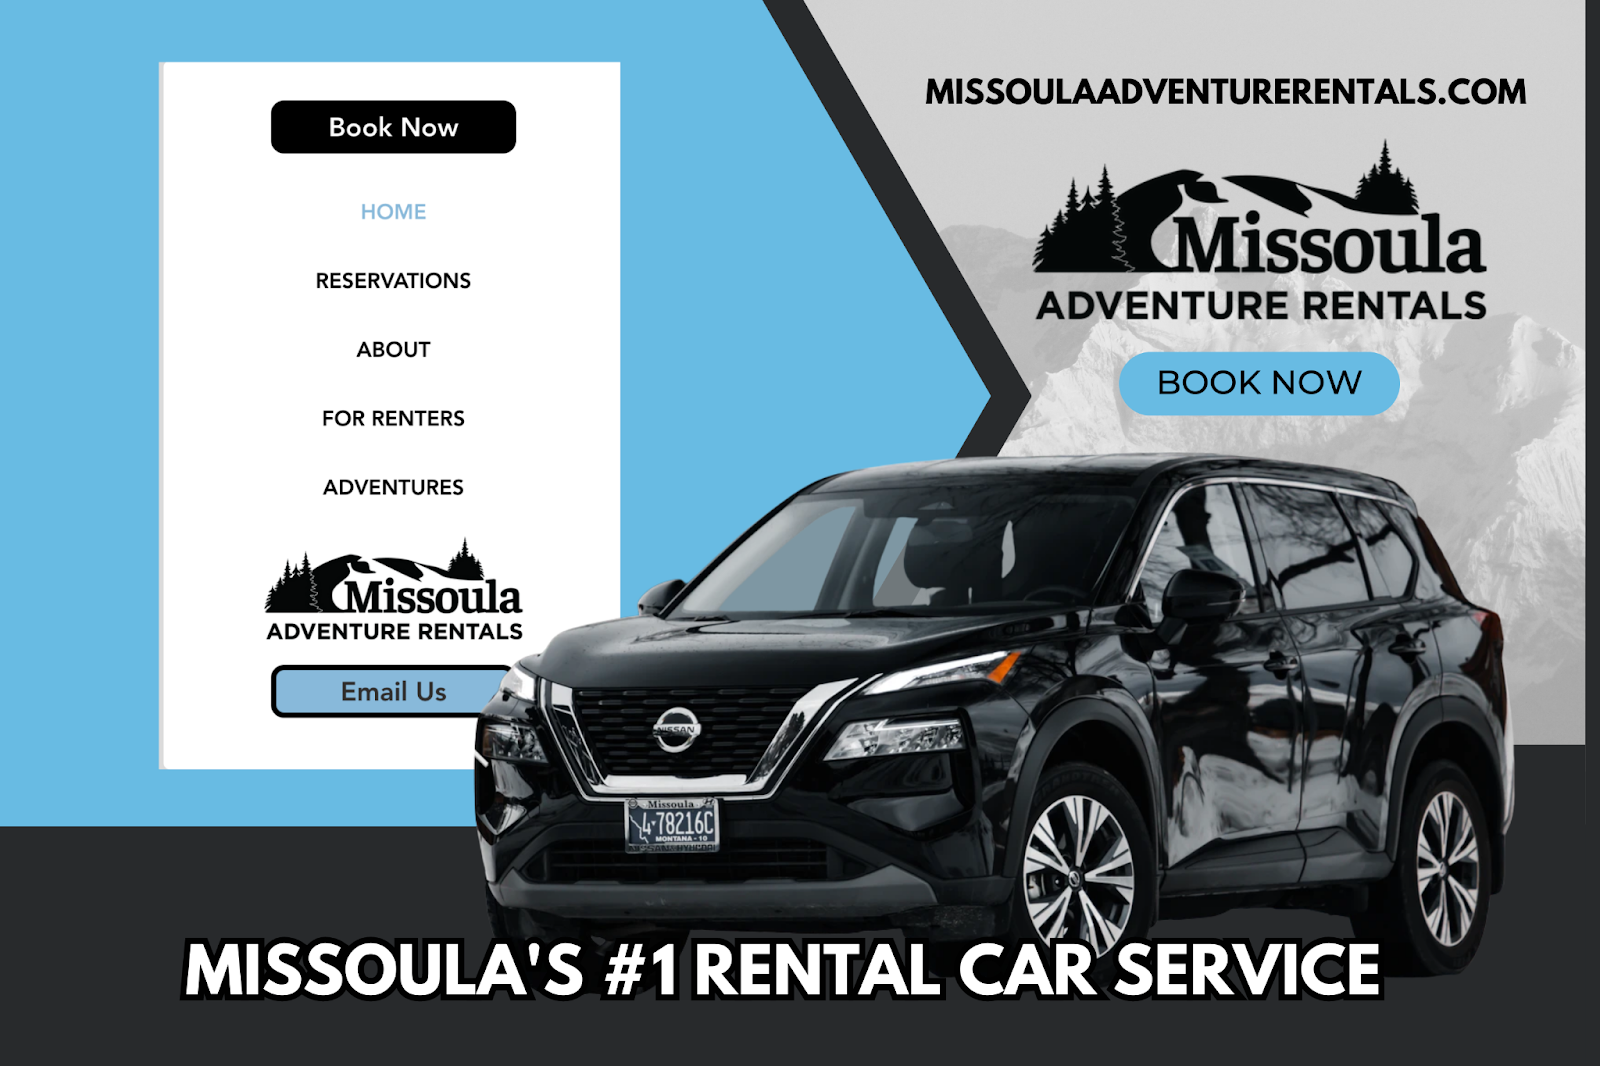 Missoula Adventure Rentals: The Key to Unlocking Montana's Great Outdoors with Ease and Confidence